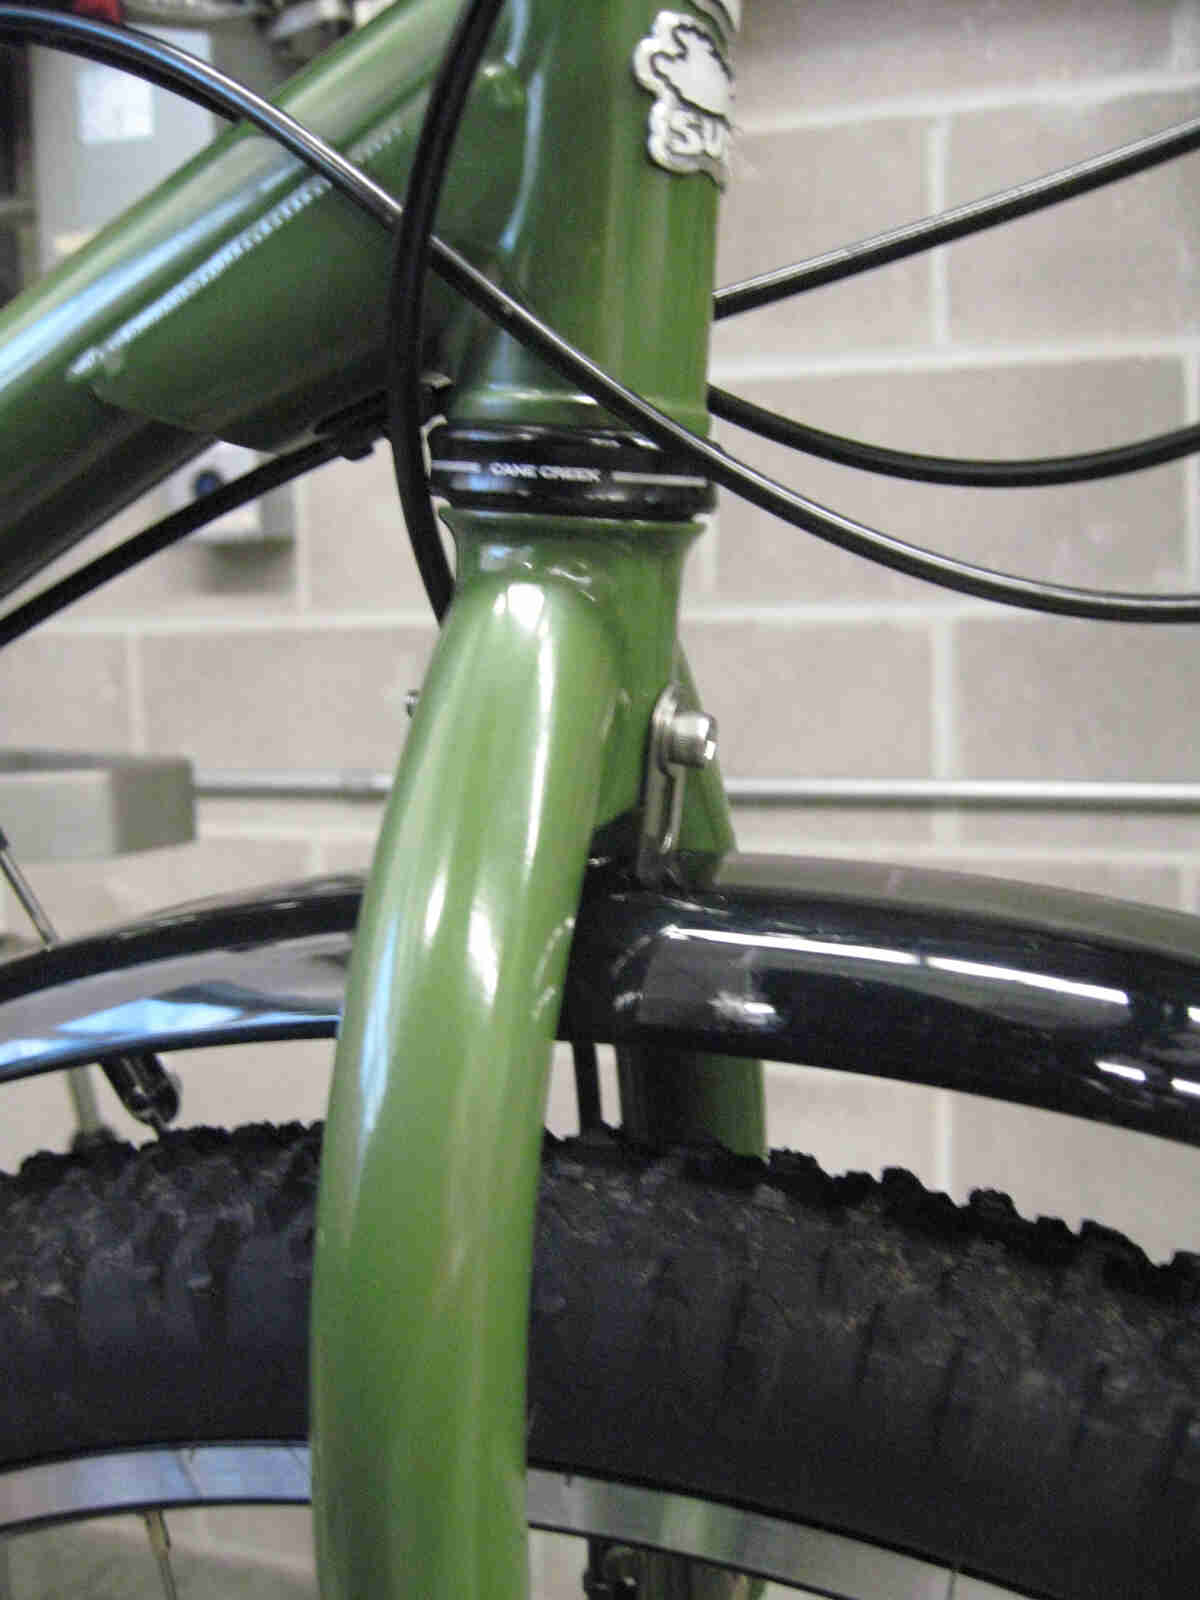 Surly Ogre bike - green - fork, front fender mounting detail - right side, close up view